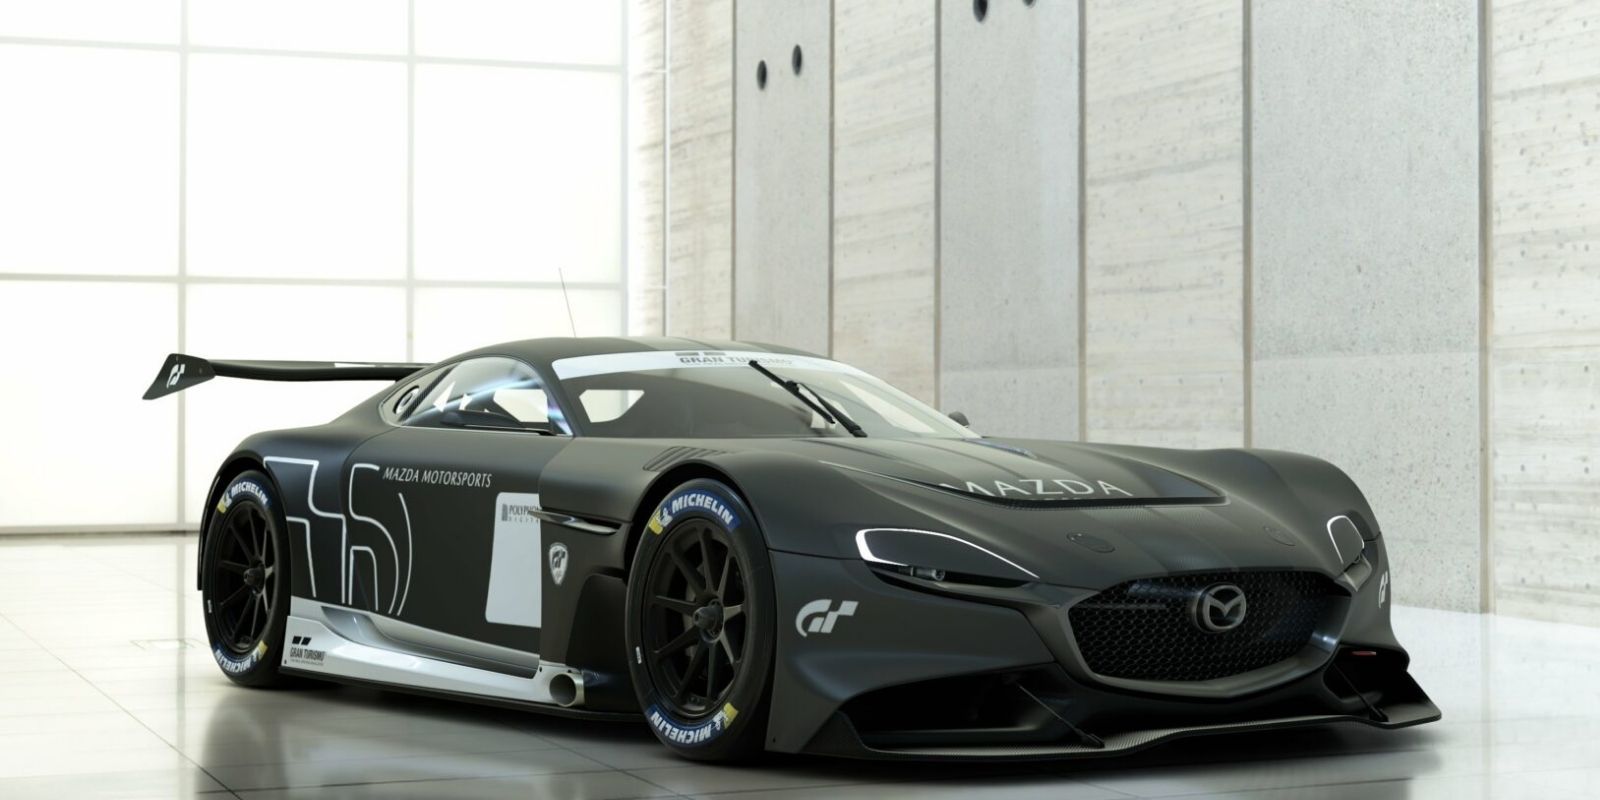 Does Gran Turismo 7 have a PC release date? - Answered